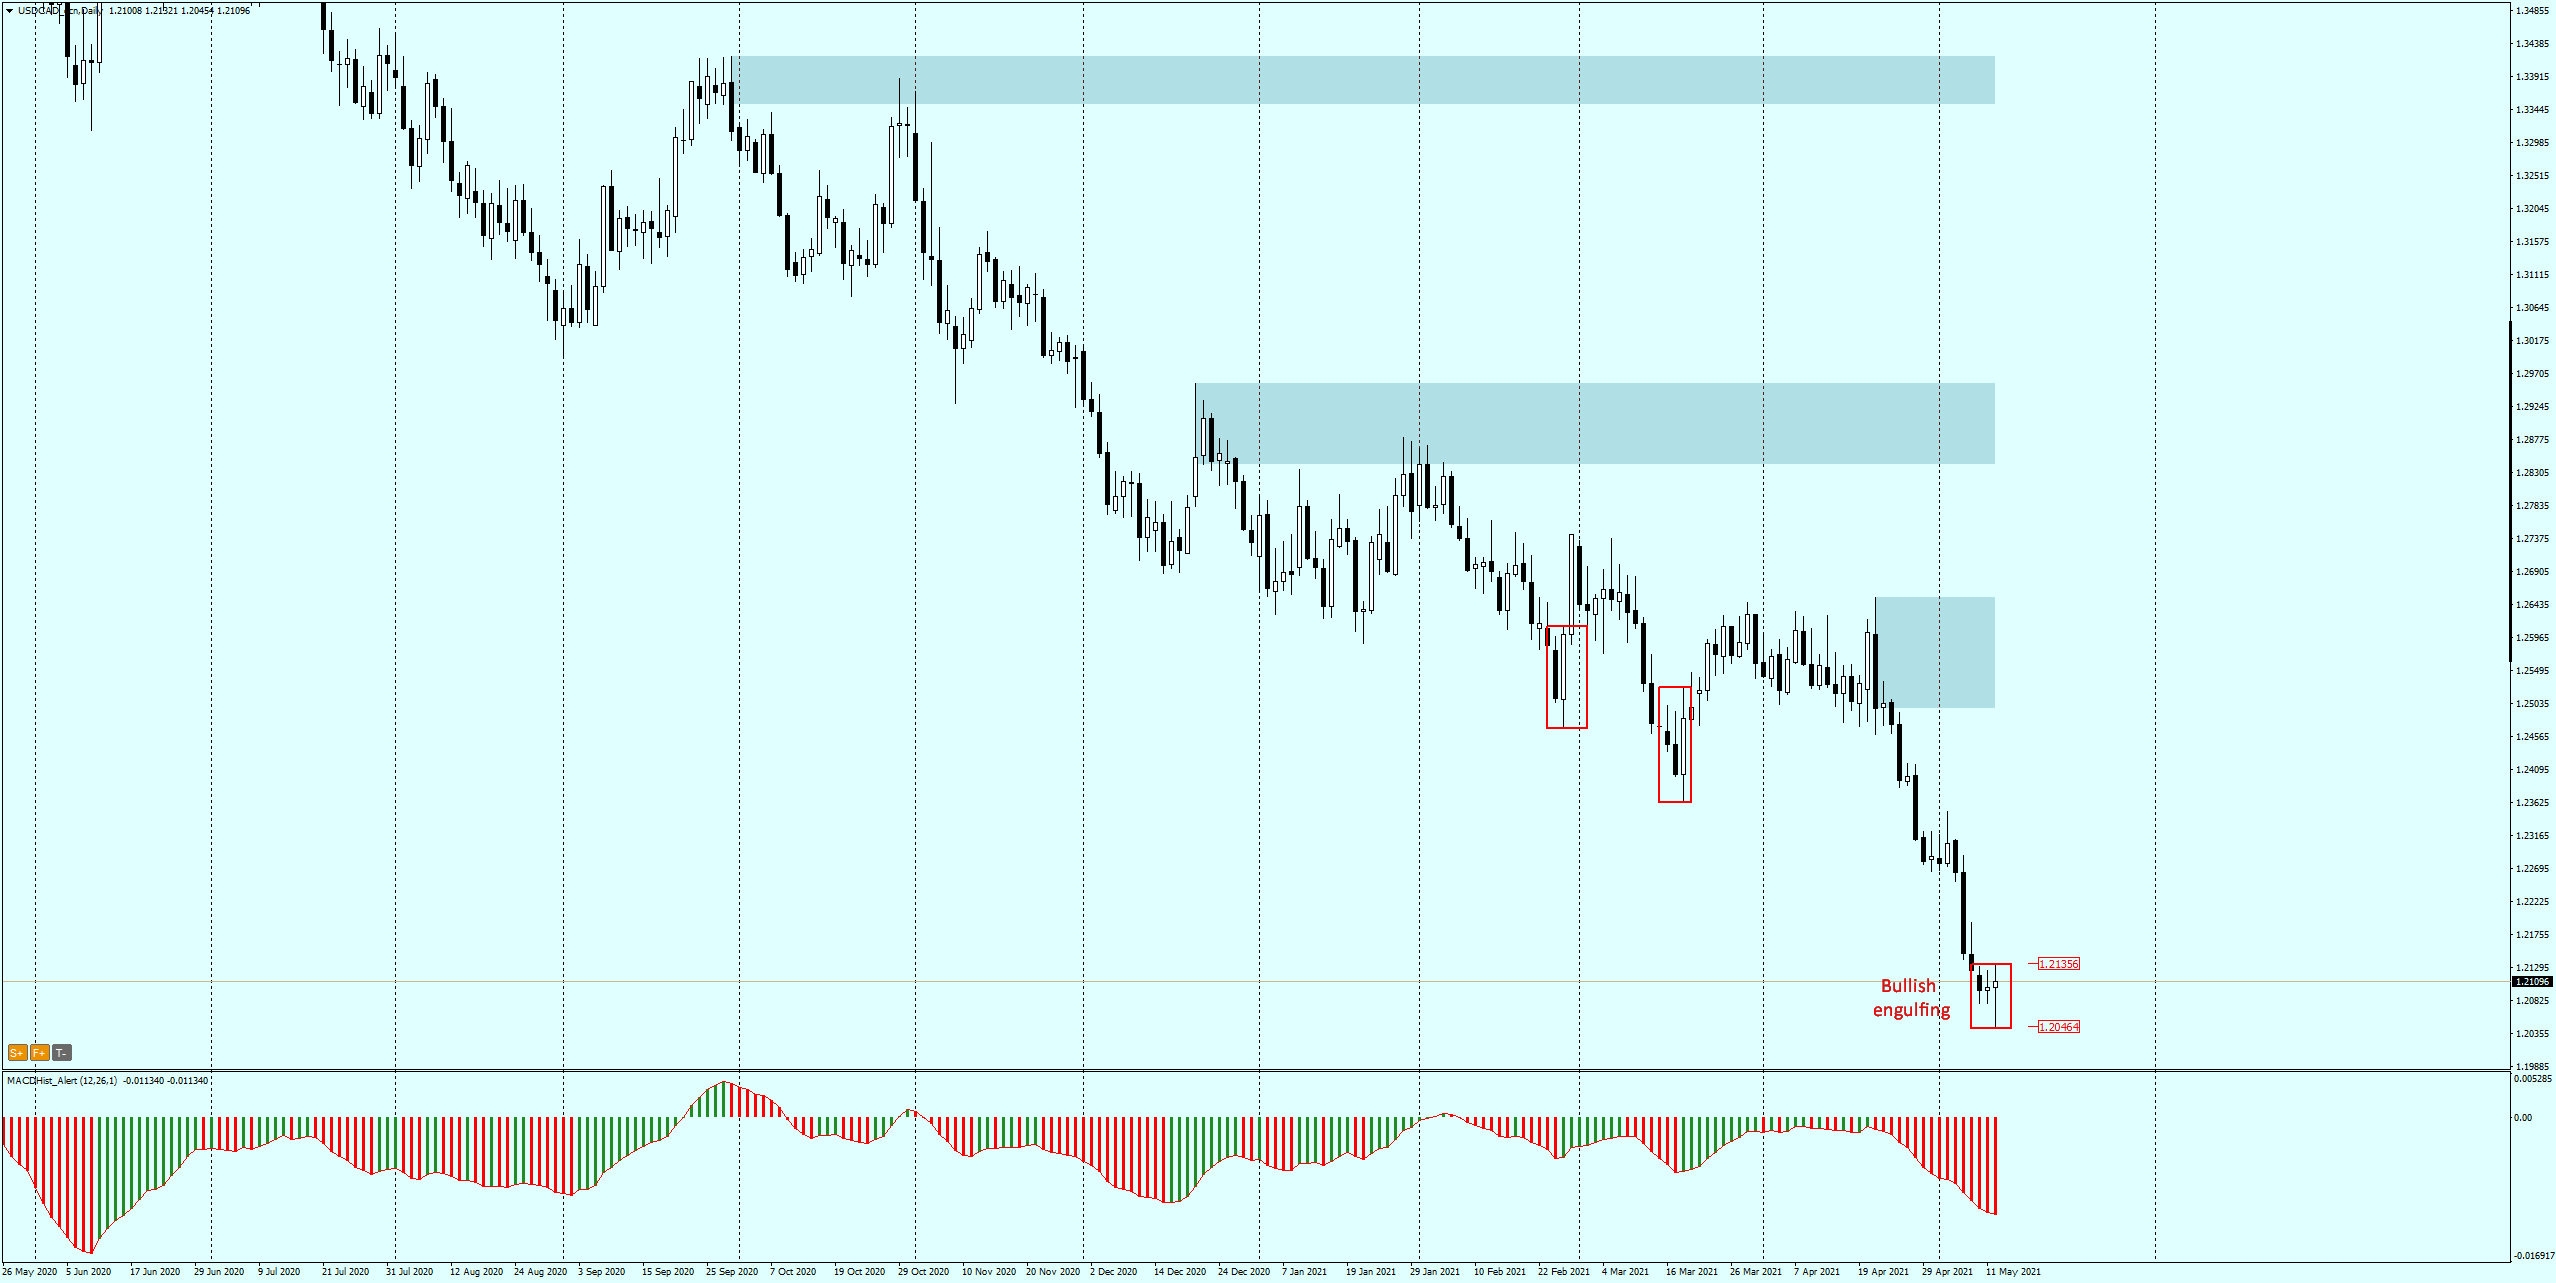 USDCAD - Daily - bullish engulfing on the neckline of the double top